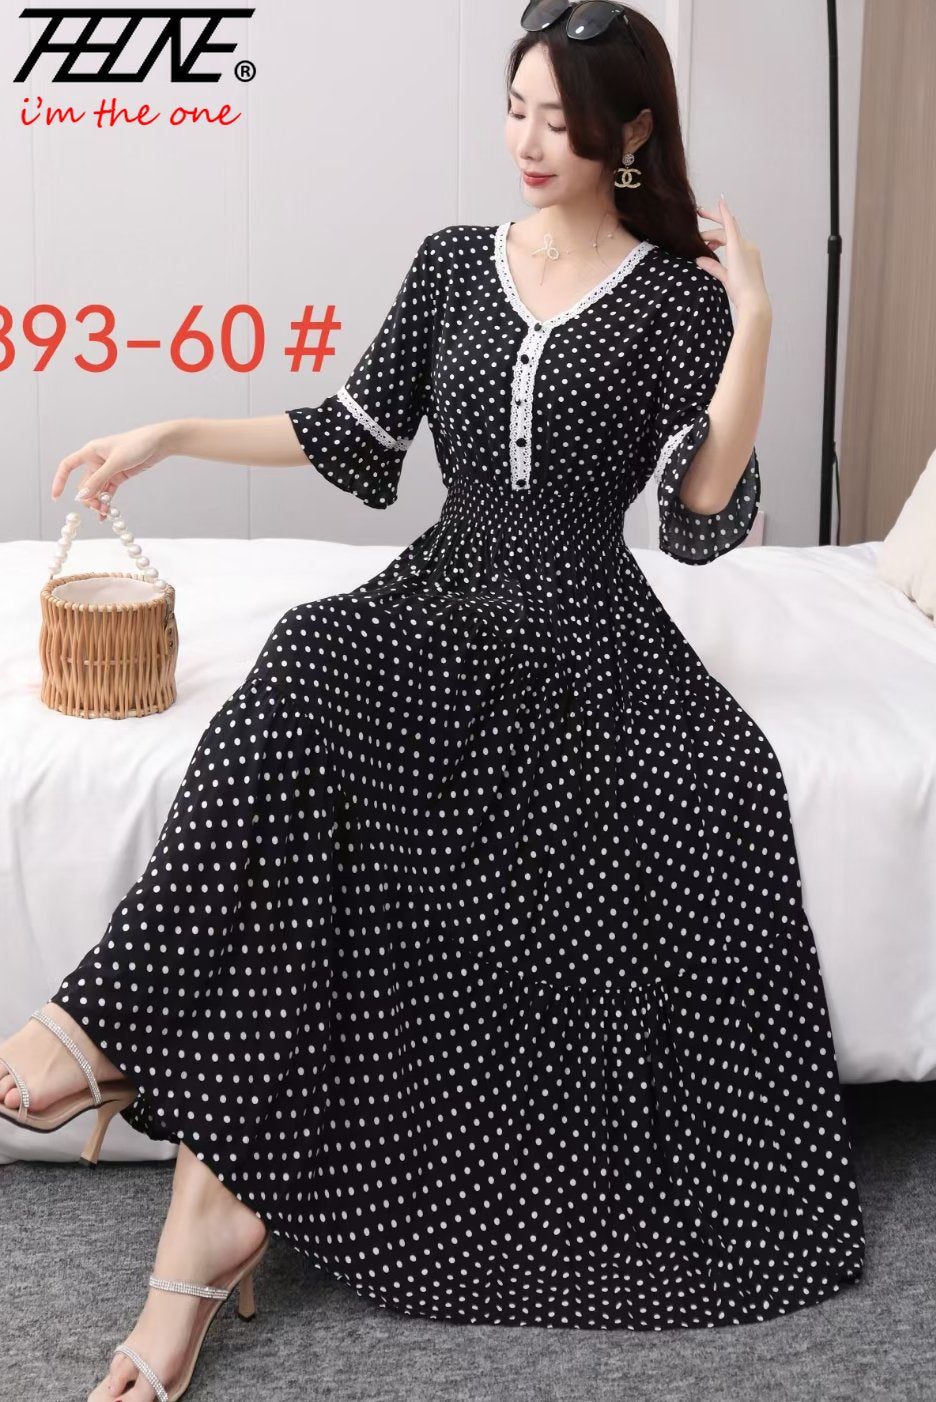 Women Summer Polka Dot and Floral Cotton Maxi Print V-Neck Casual Dress - WD8051